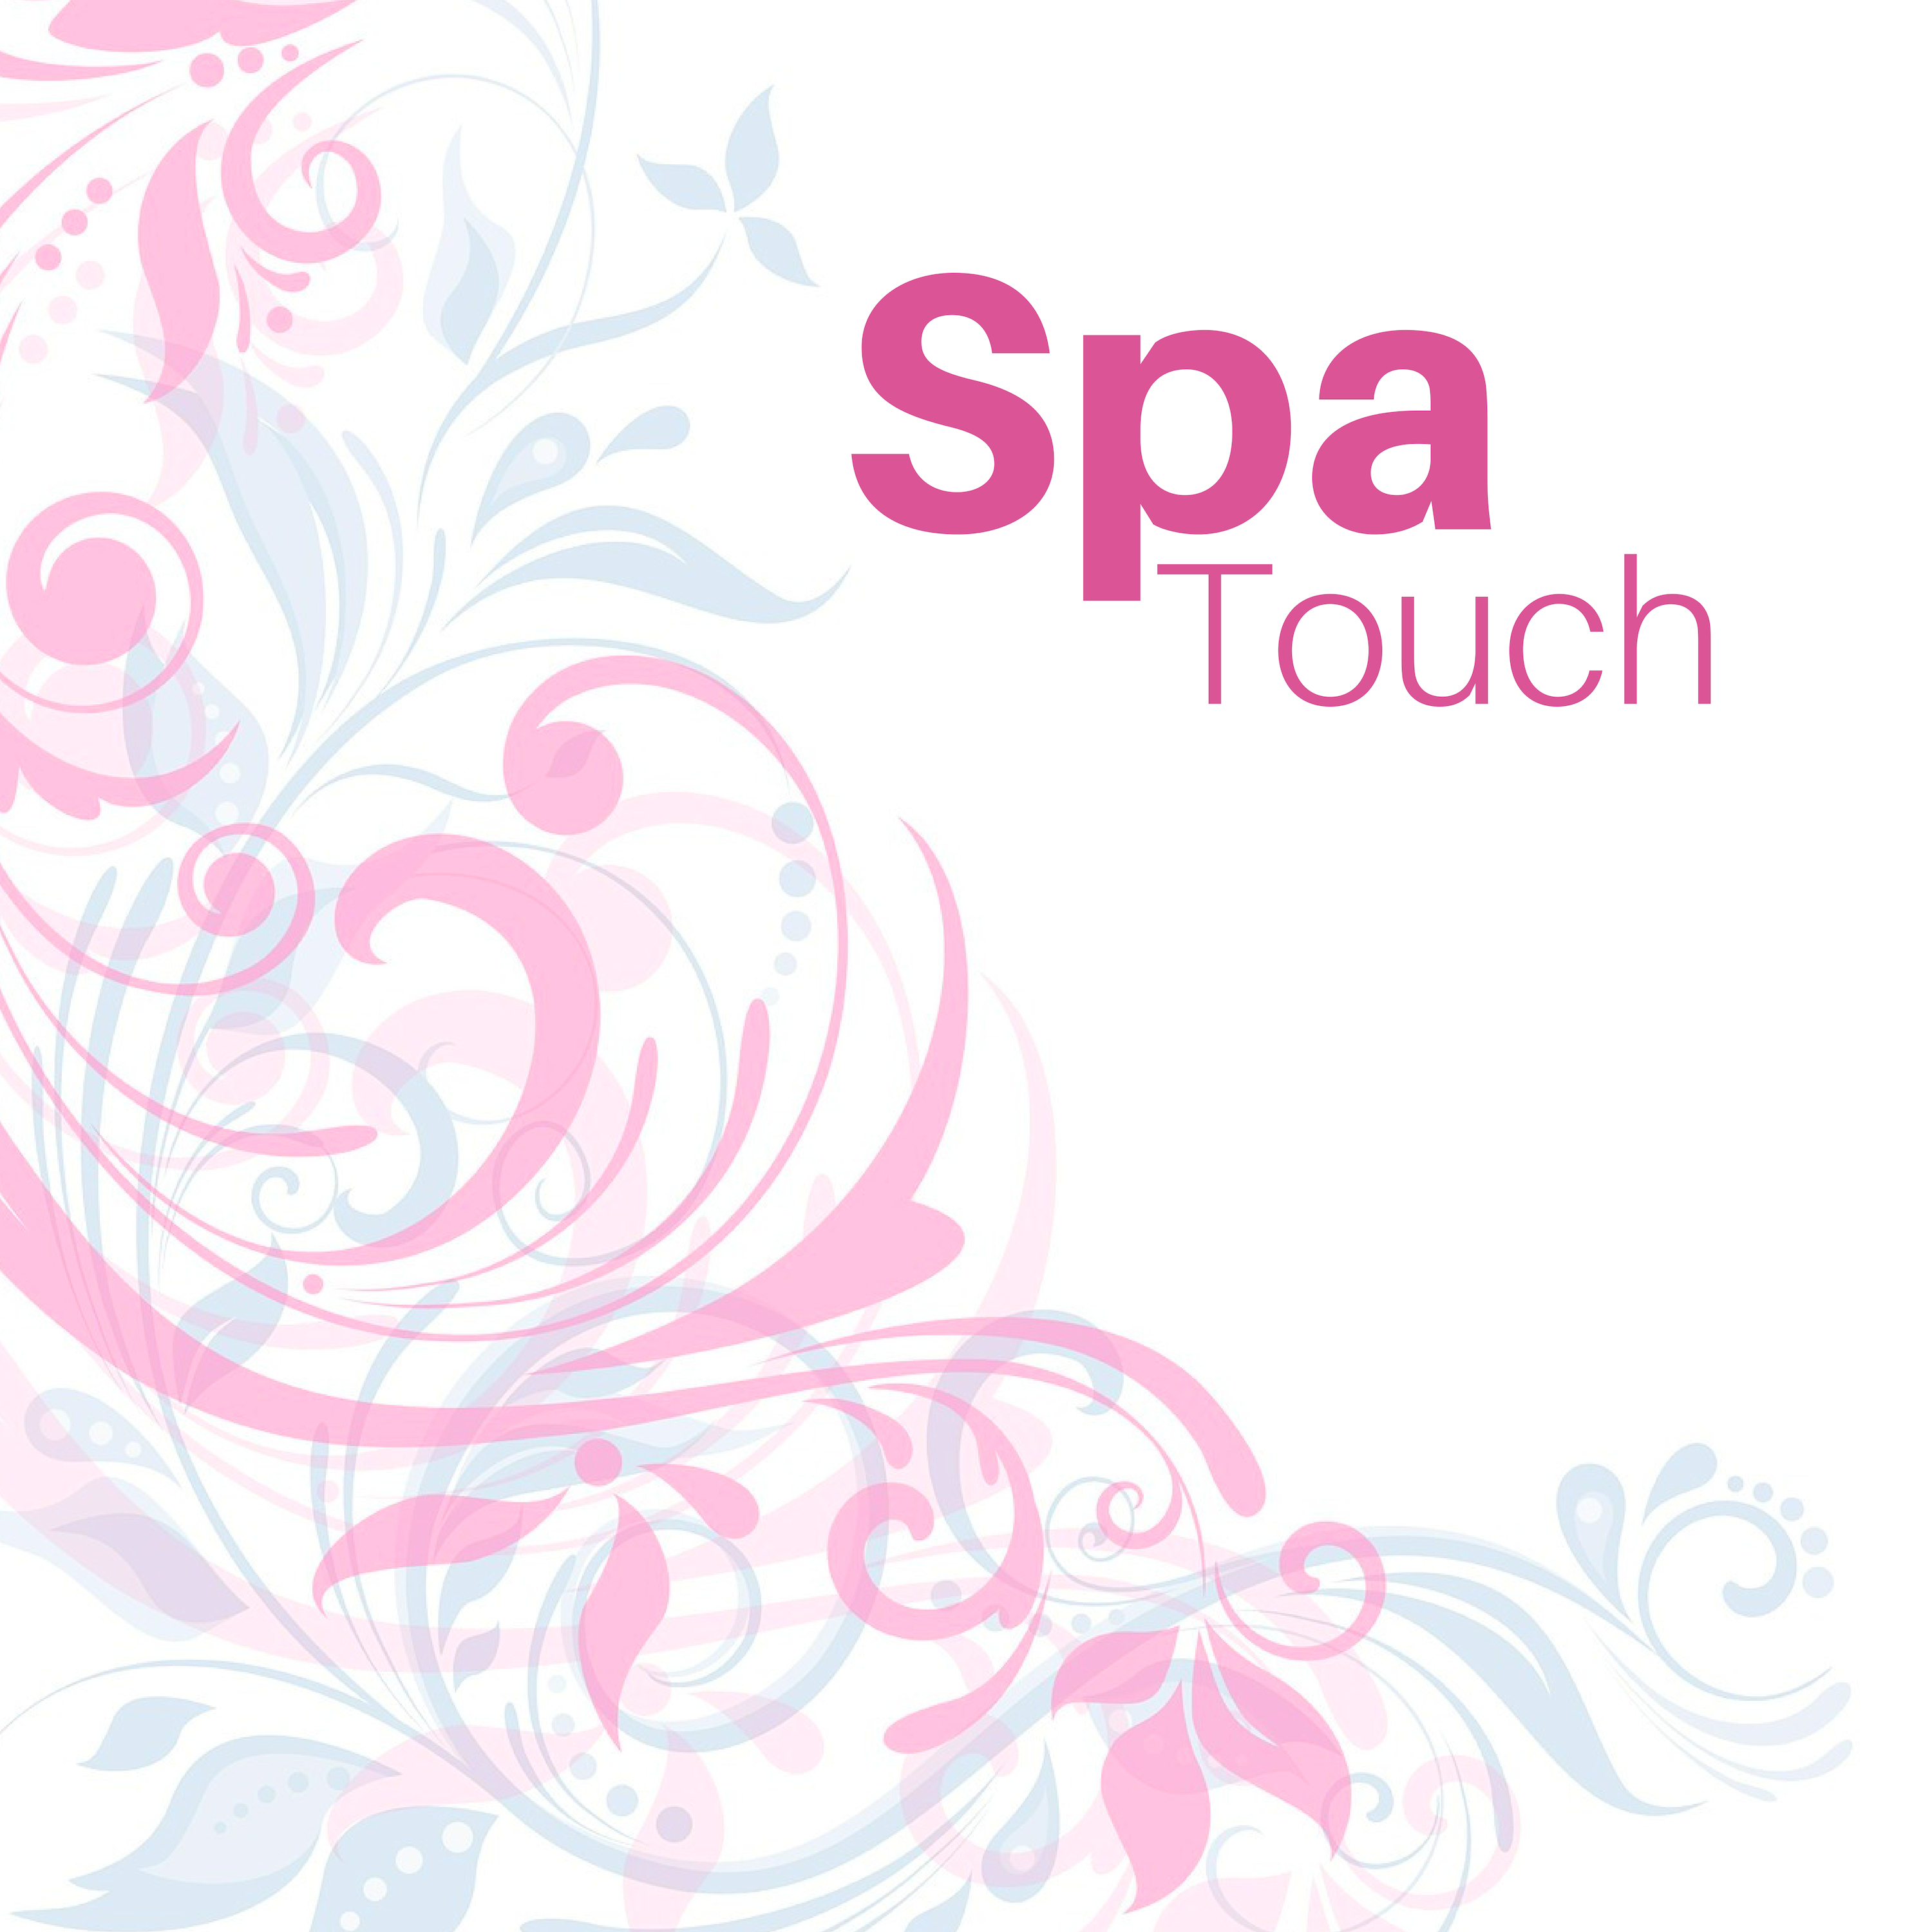 Spa Touch - Best Spa & Massage Relaxation Songs for Chilling